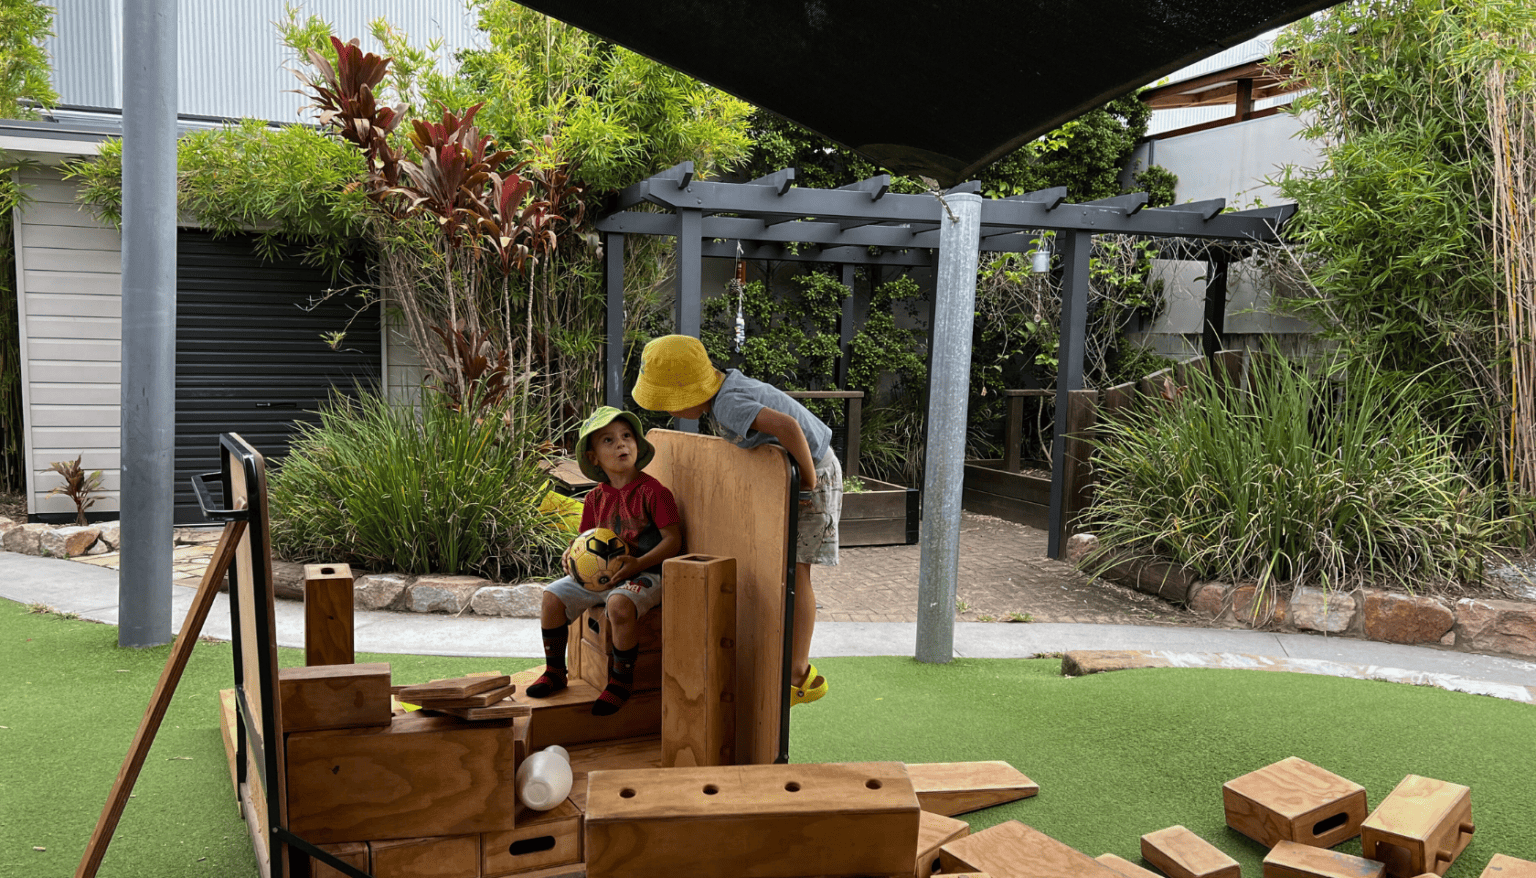 Two young children wearing sun hats are playing with wooden blocks in an outdoor play area. One child is sitting and holding a soccer ball, while the other is climbing on the structure they've built. The scene is set under a shaded canopy with lush greenery and a pergola in the background.